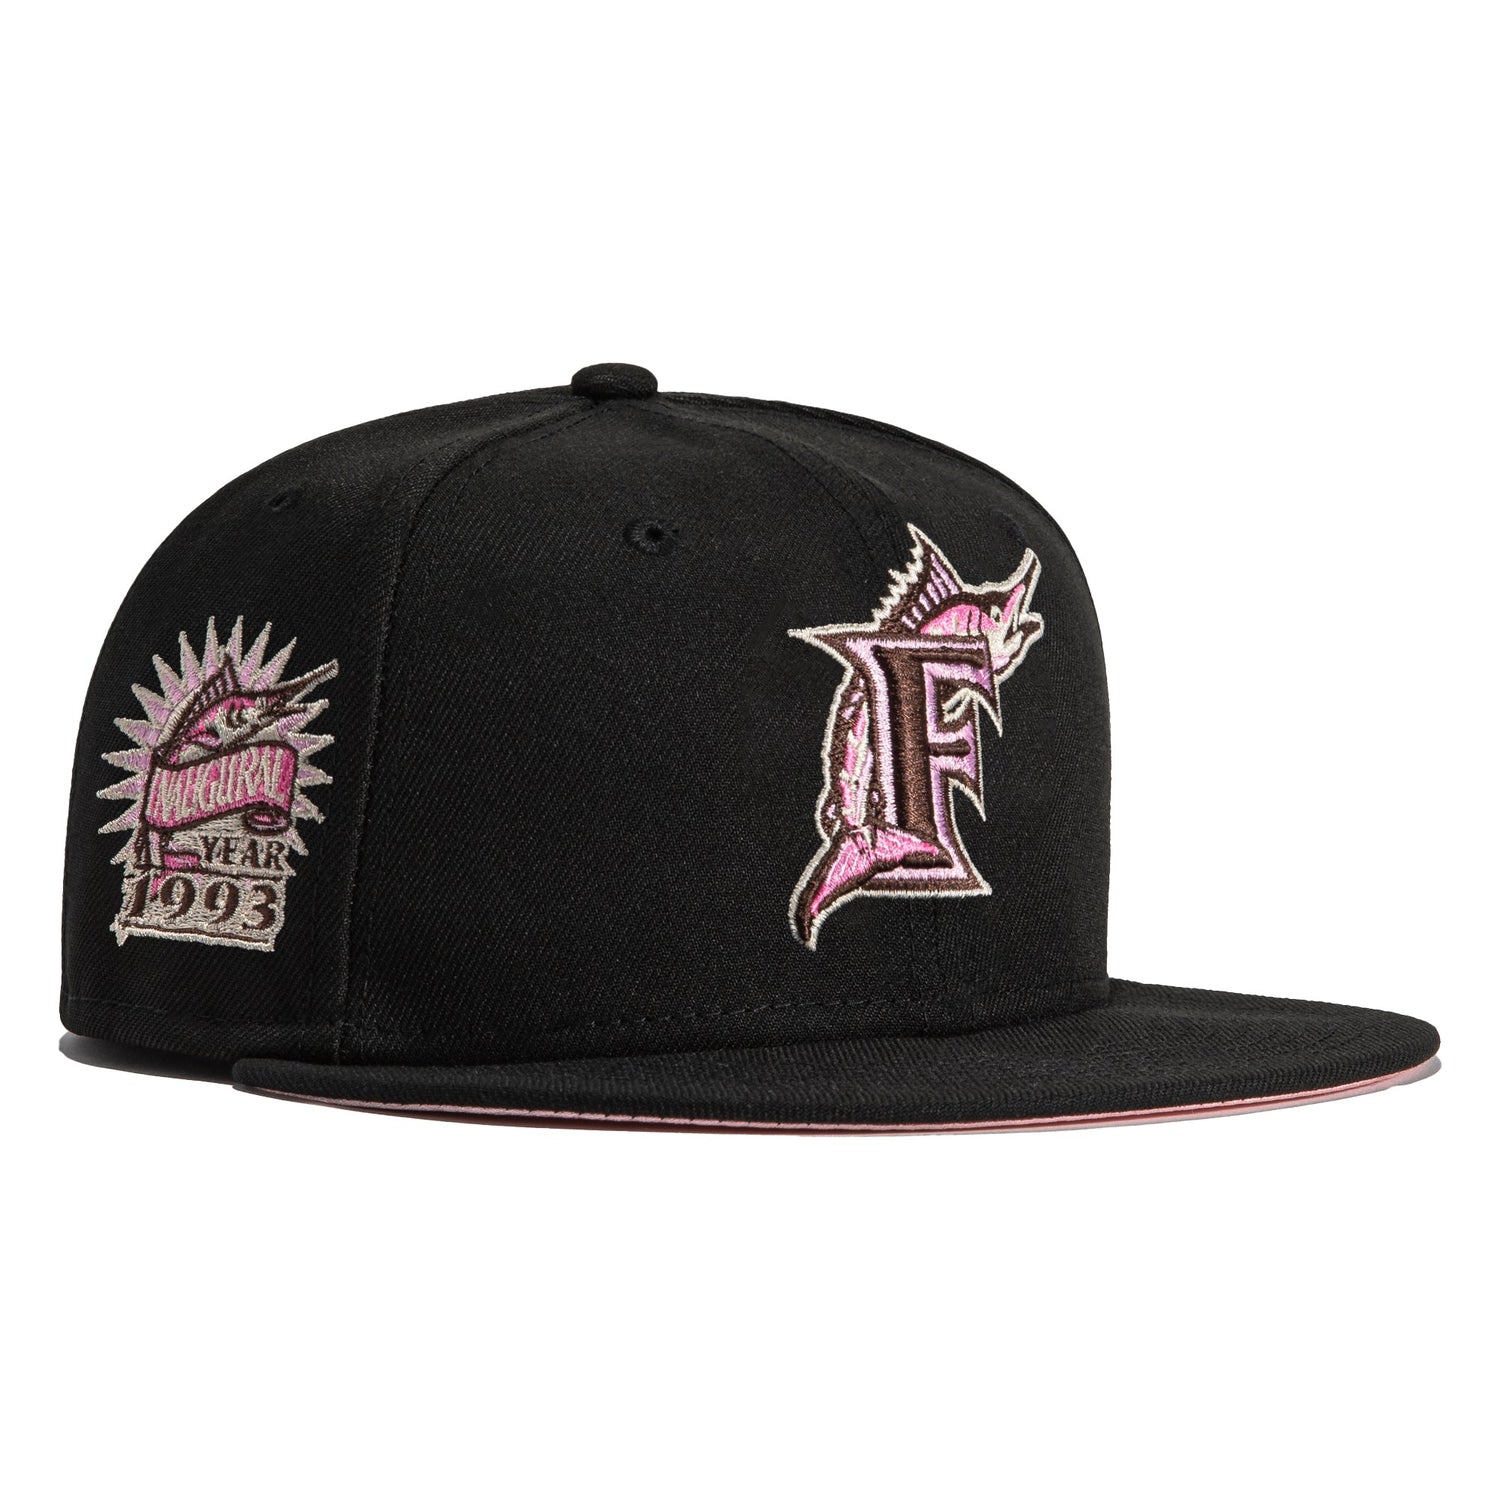 New Era 59FIFTY Cookies and Cream Miami Marlins Inaugural Patch Hat - Black Black / 8